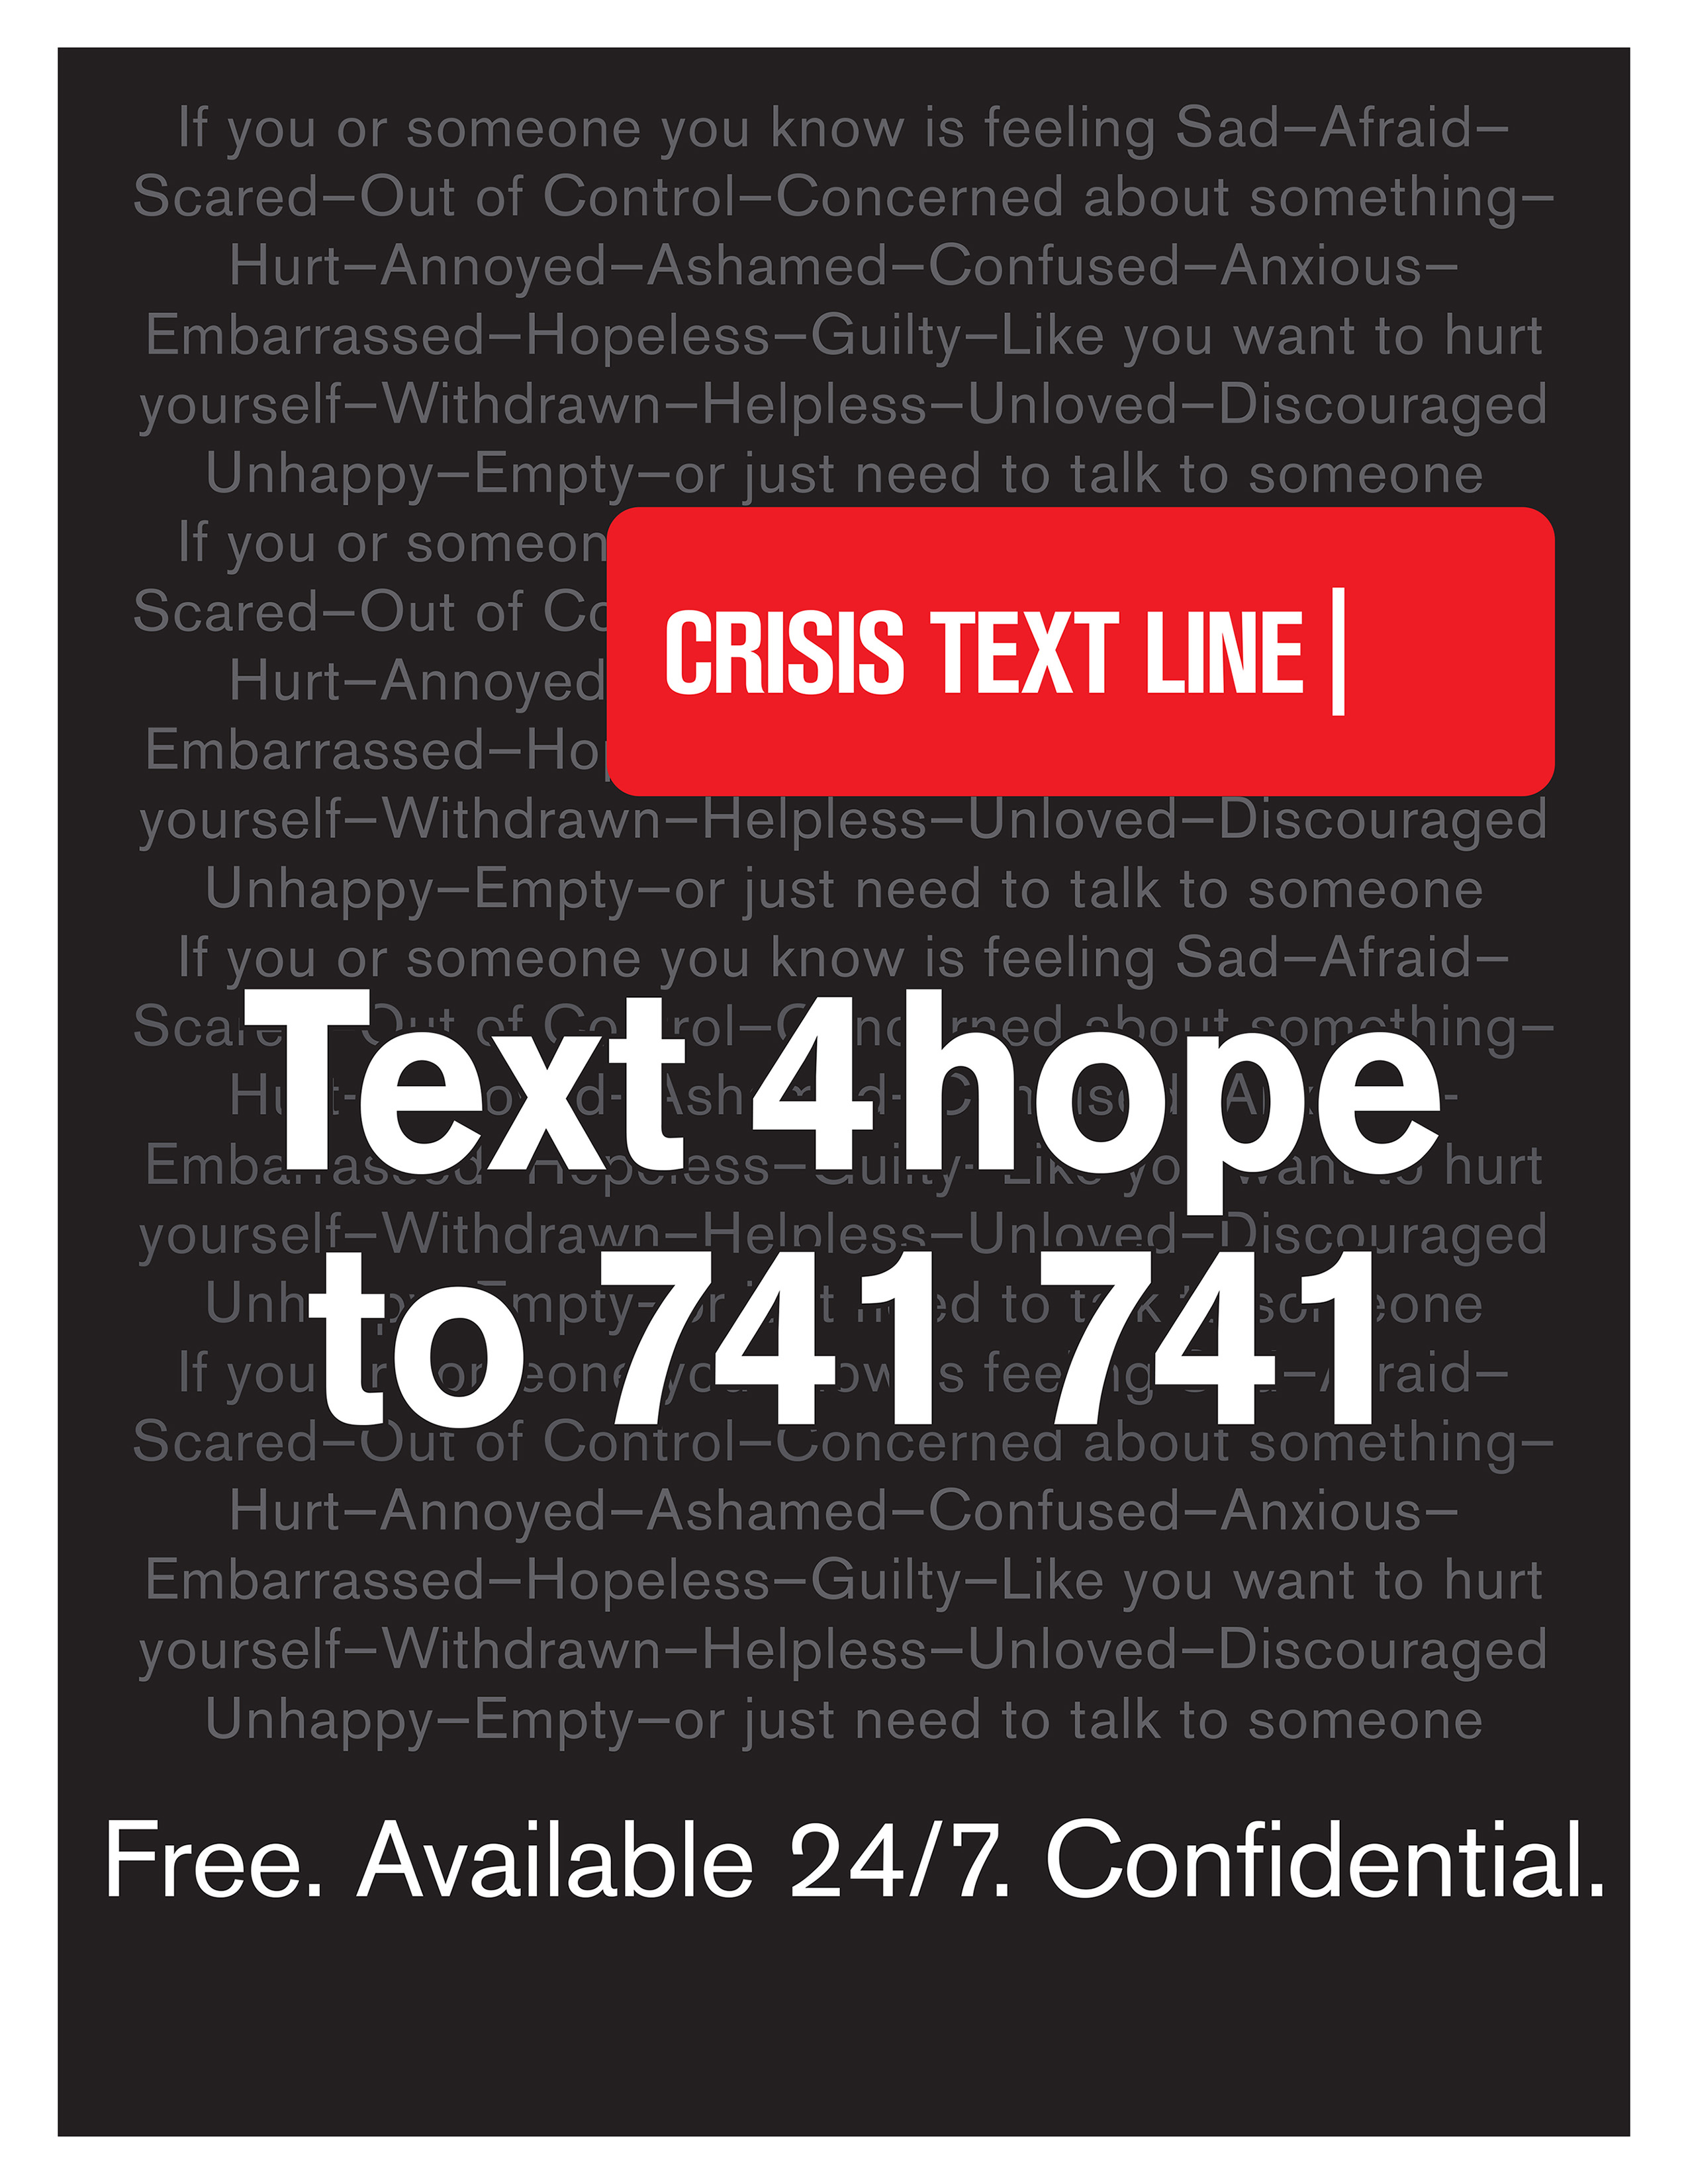 crisis text line - text 4hope to 741 741